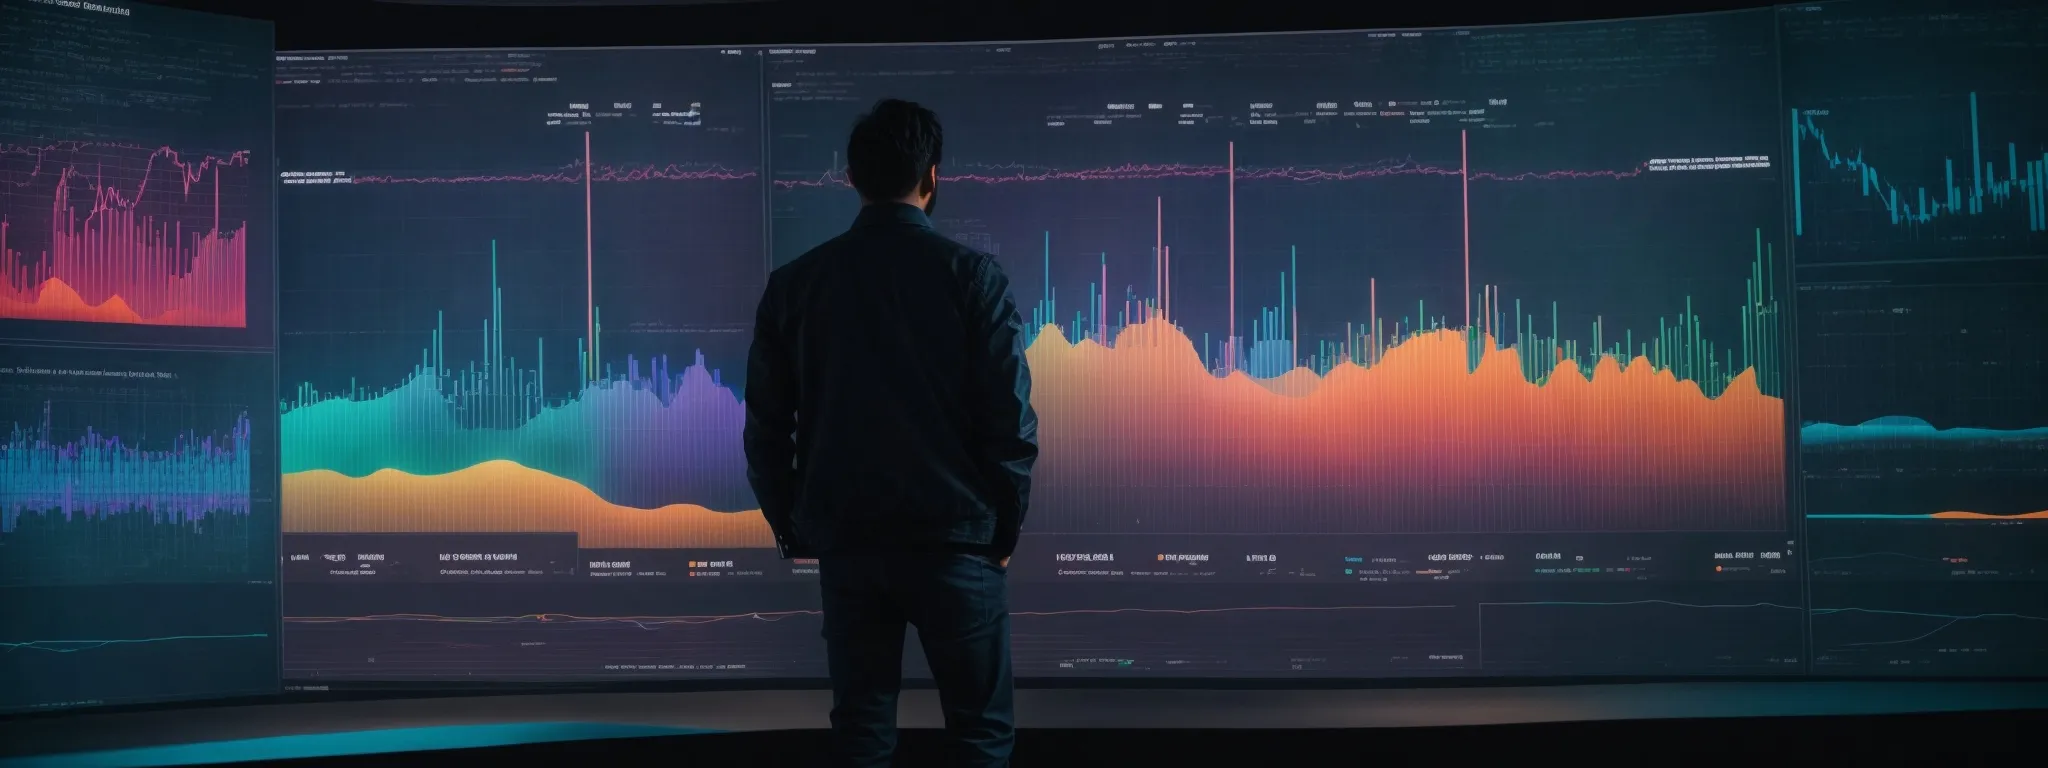 a person stands in front of a large screen displaying colorful graphs and analytics data, symbolizing the evaluation of advanced seo tools.